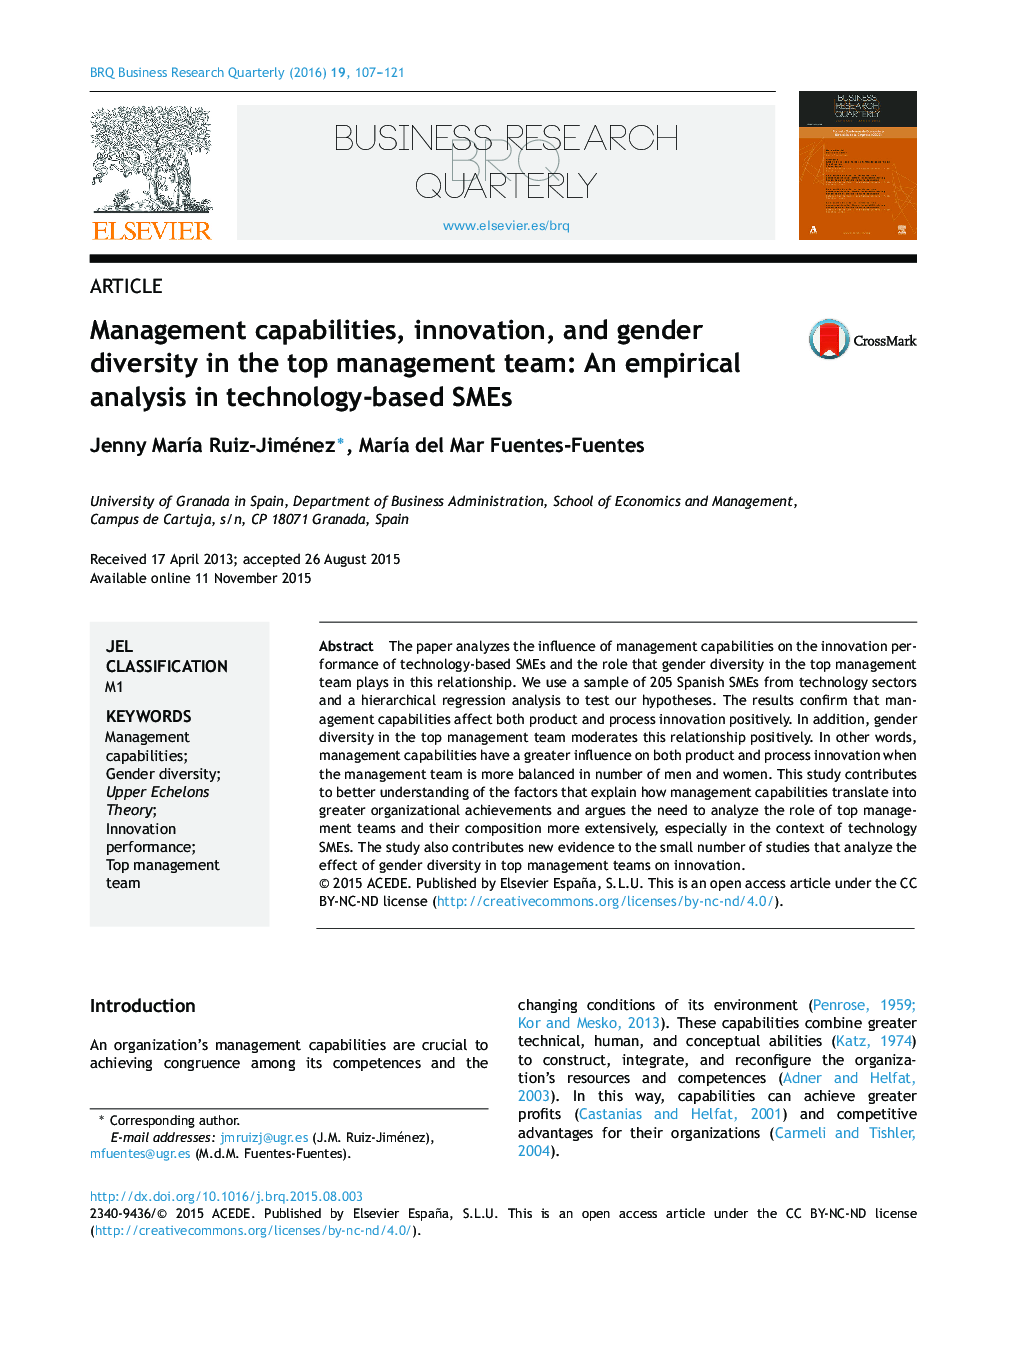 Management capabilities, innovation, and gender diversity in the top management team: An empirical analysis in technology-based SMEs